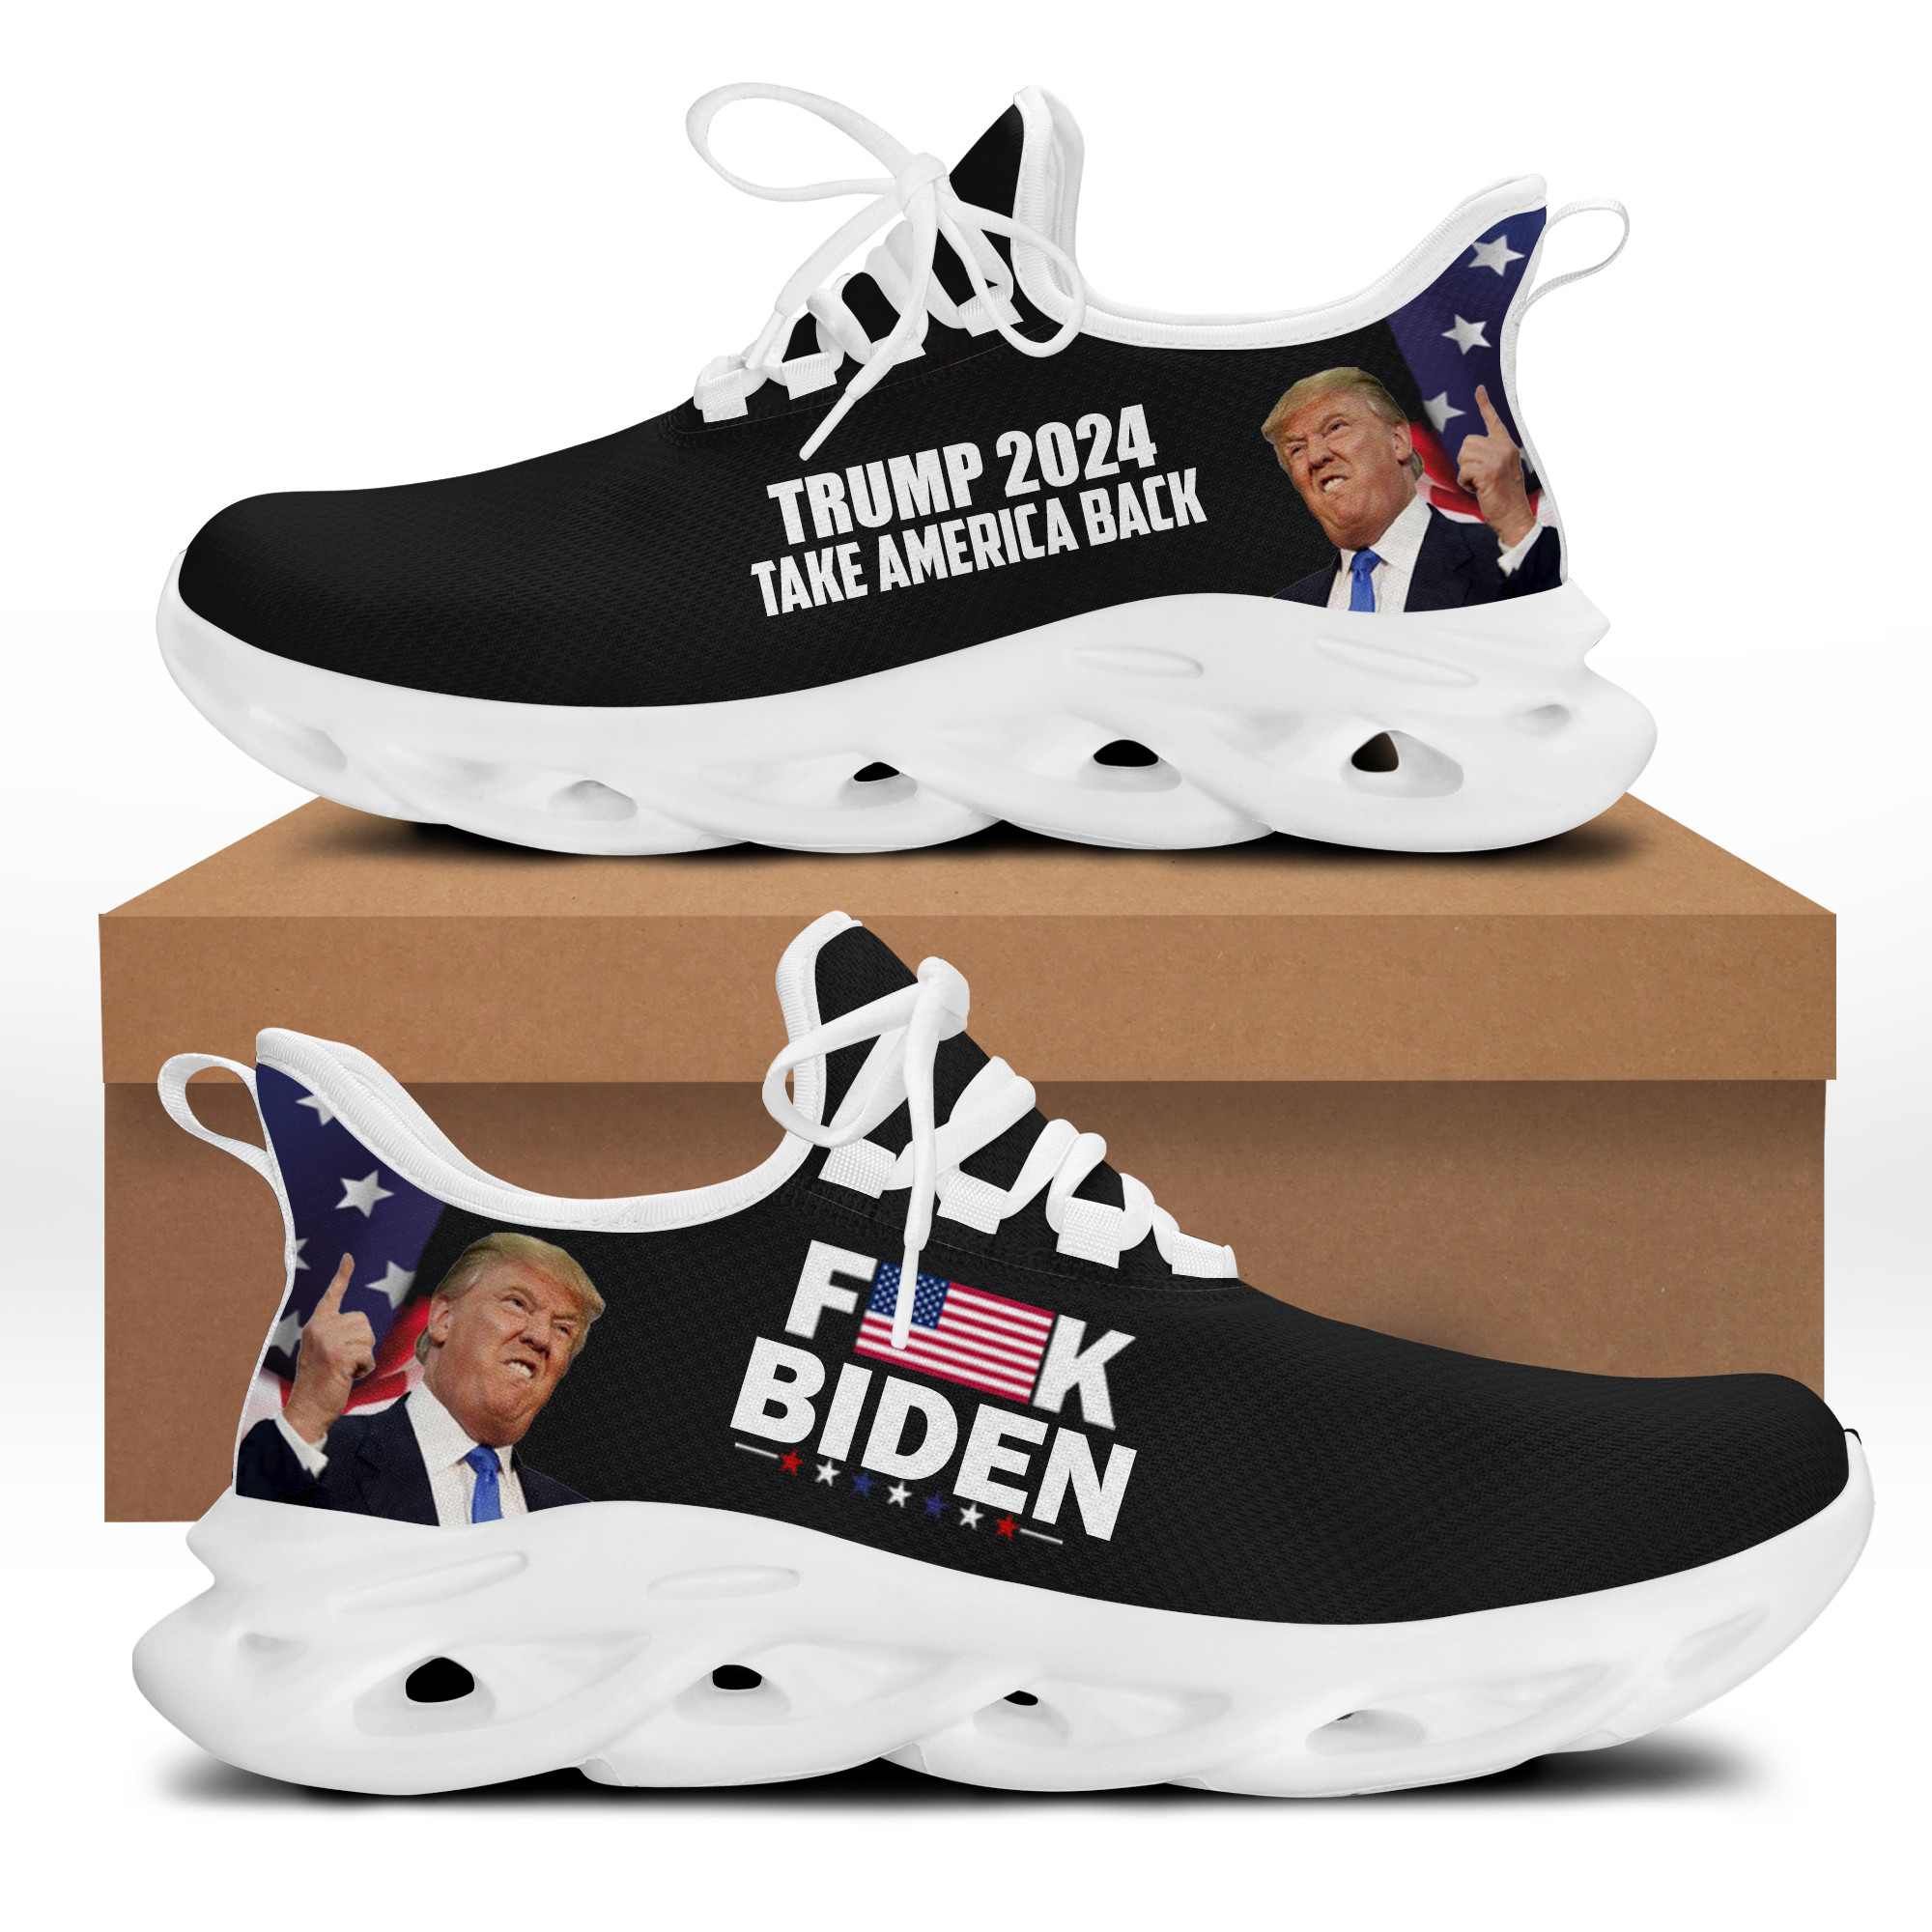 Trump 2024 Take America Back Clunky Sneakers Fck Biden Support For Don